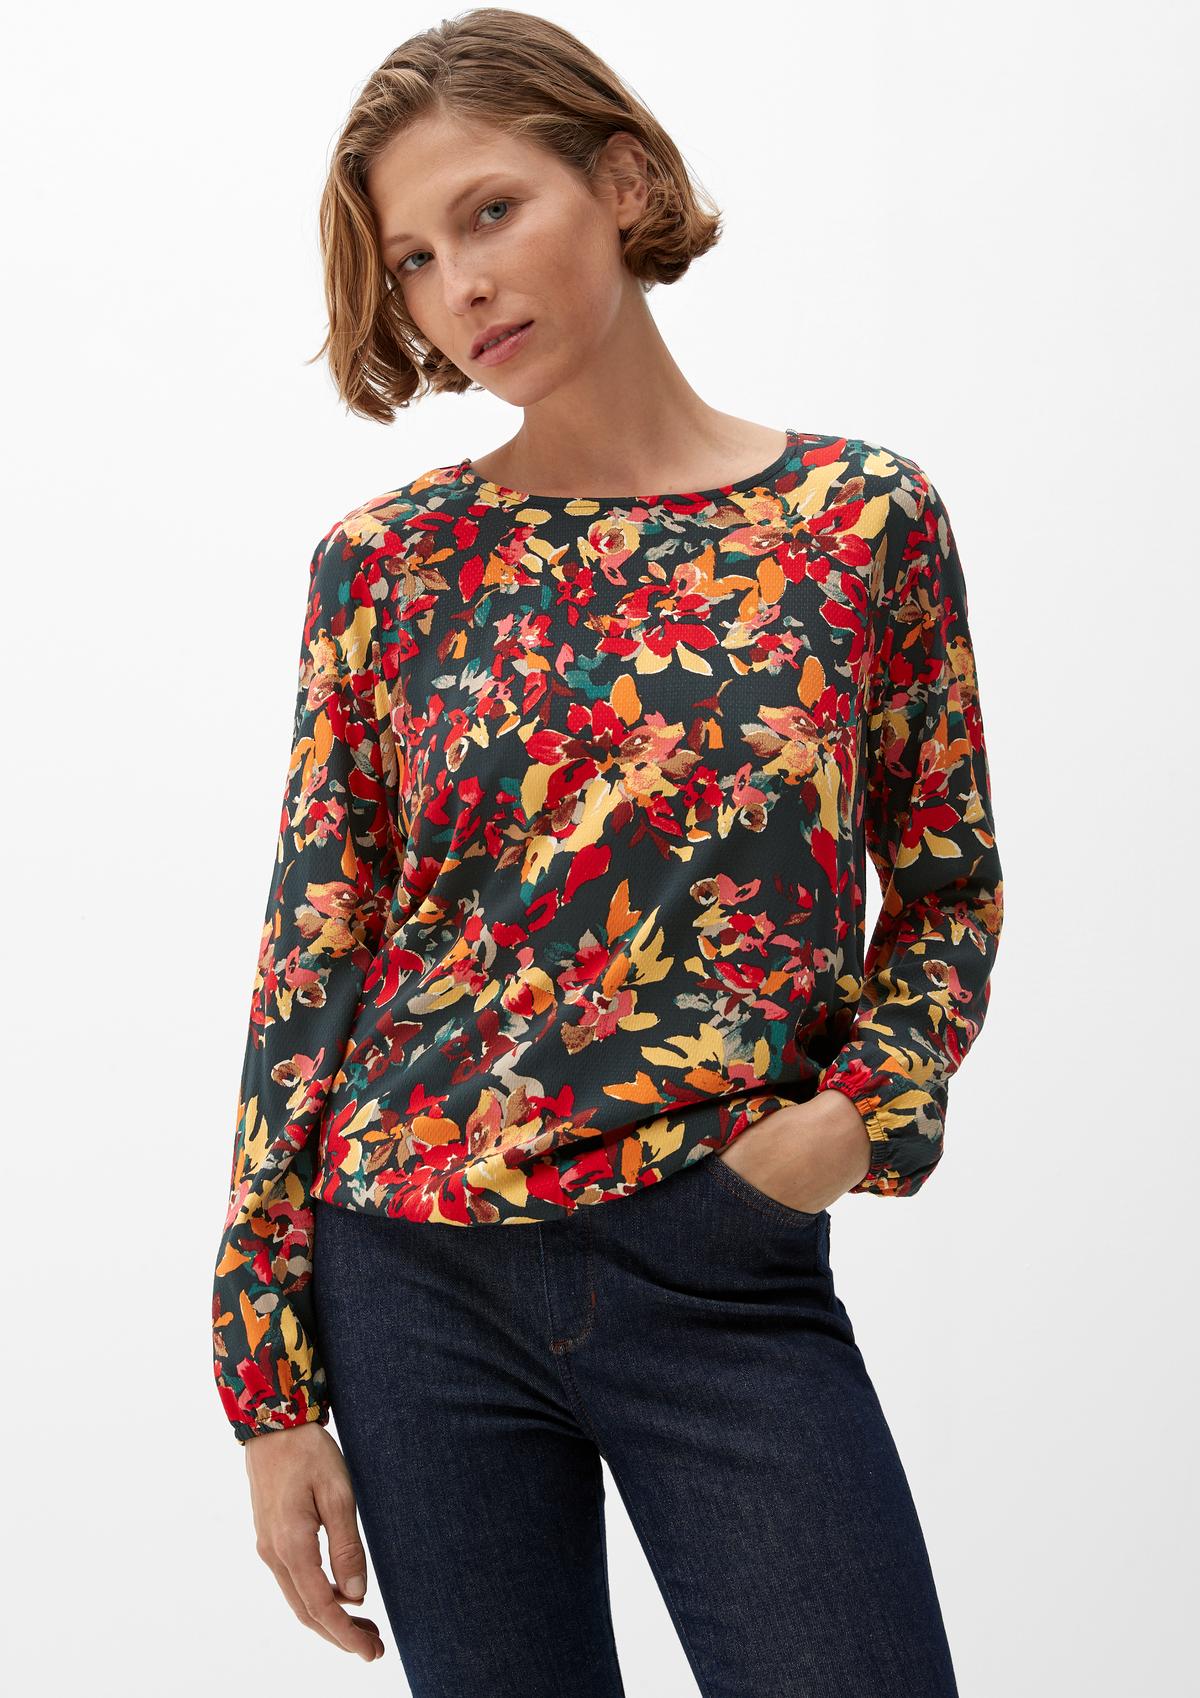 s.Oliver Materialmix-Bluse mit Print